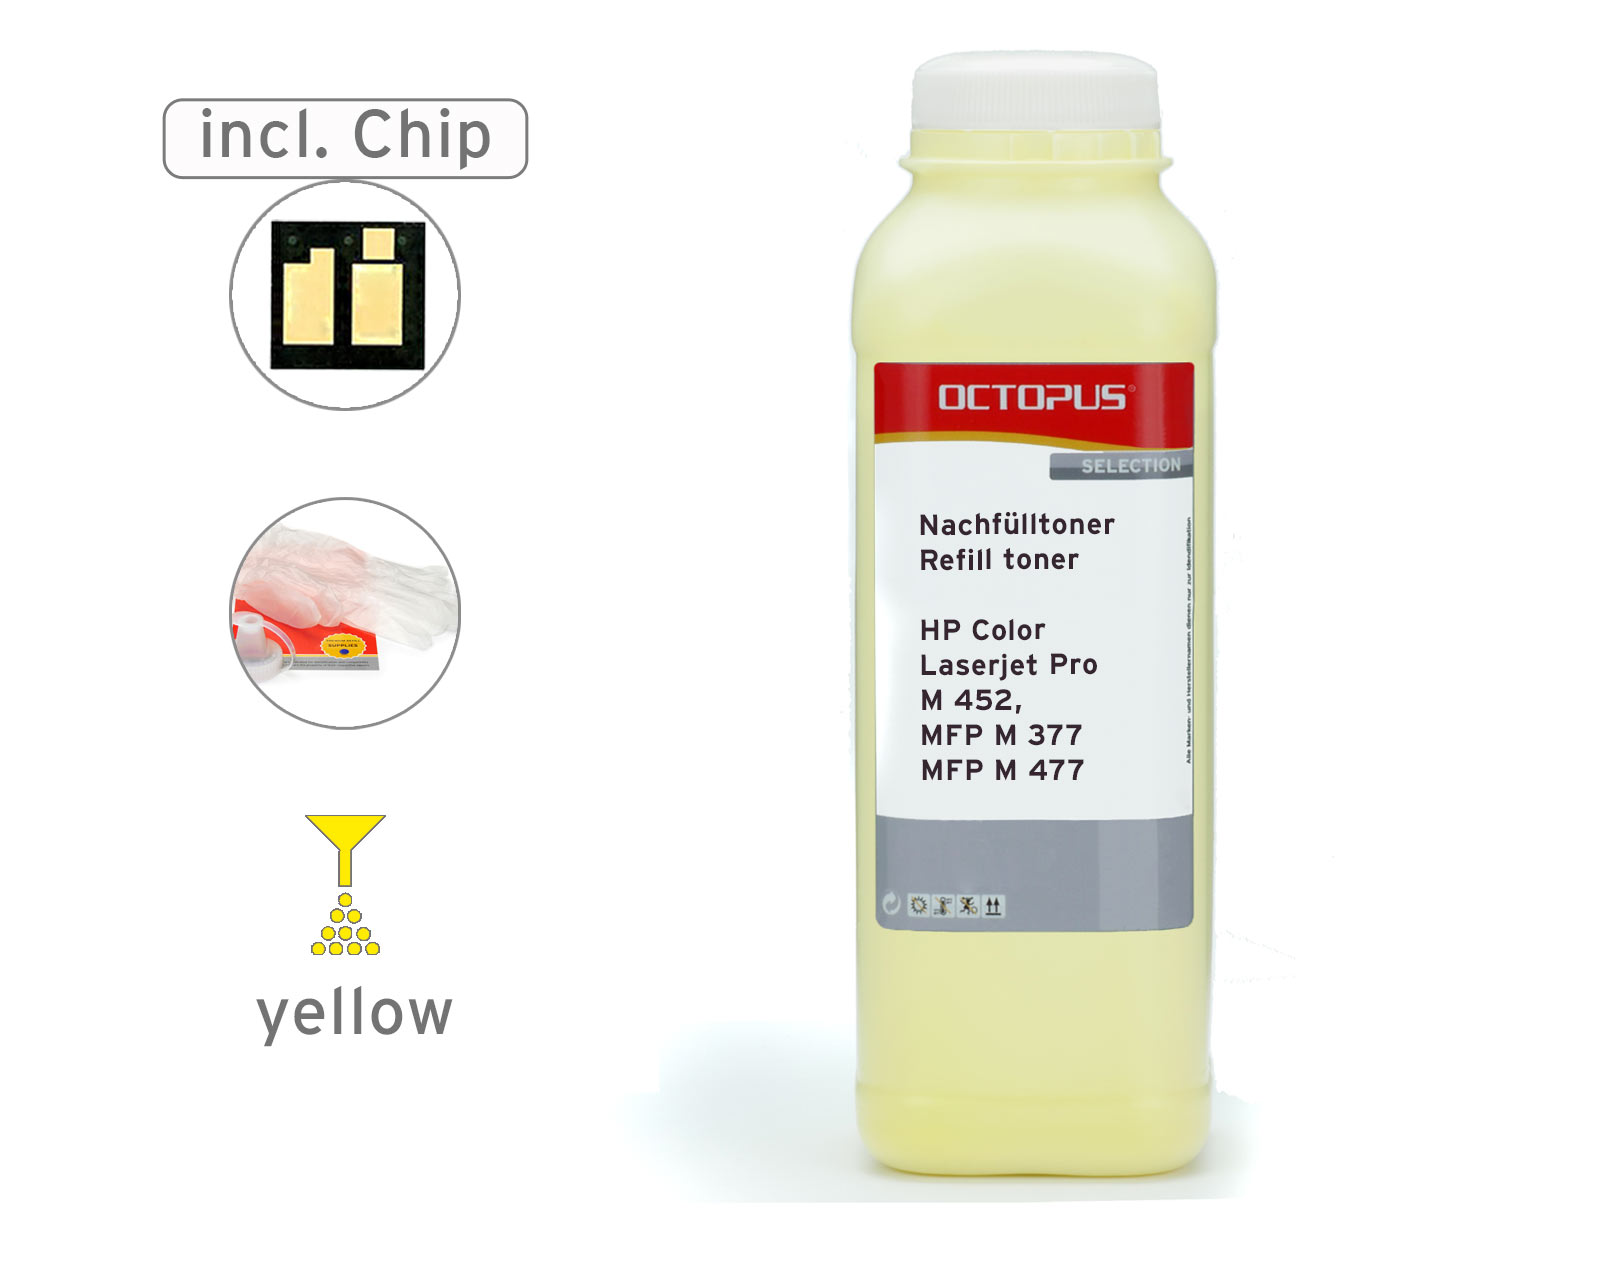 Refill toner set with chip for HP Color Laserjet Pro M 452, MFP M 377 and MFP M 477, Yellow